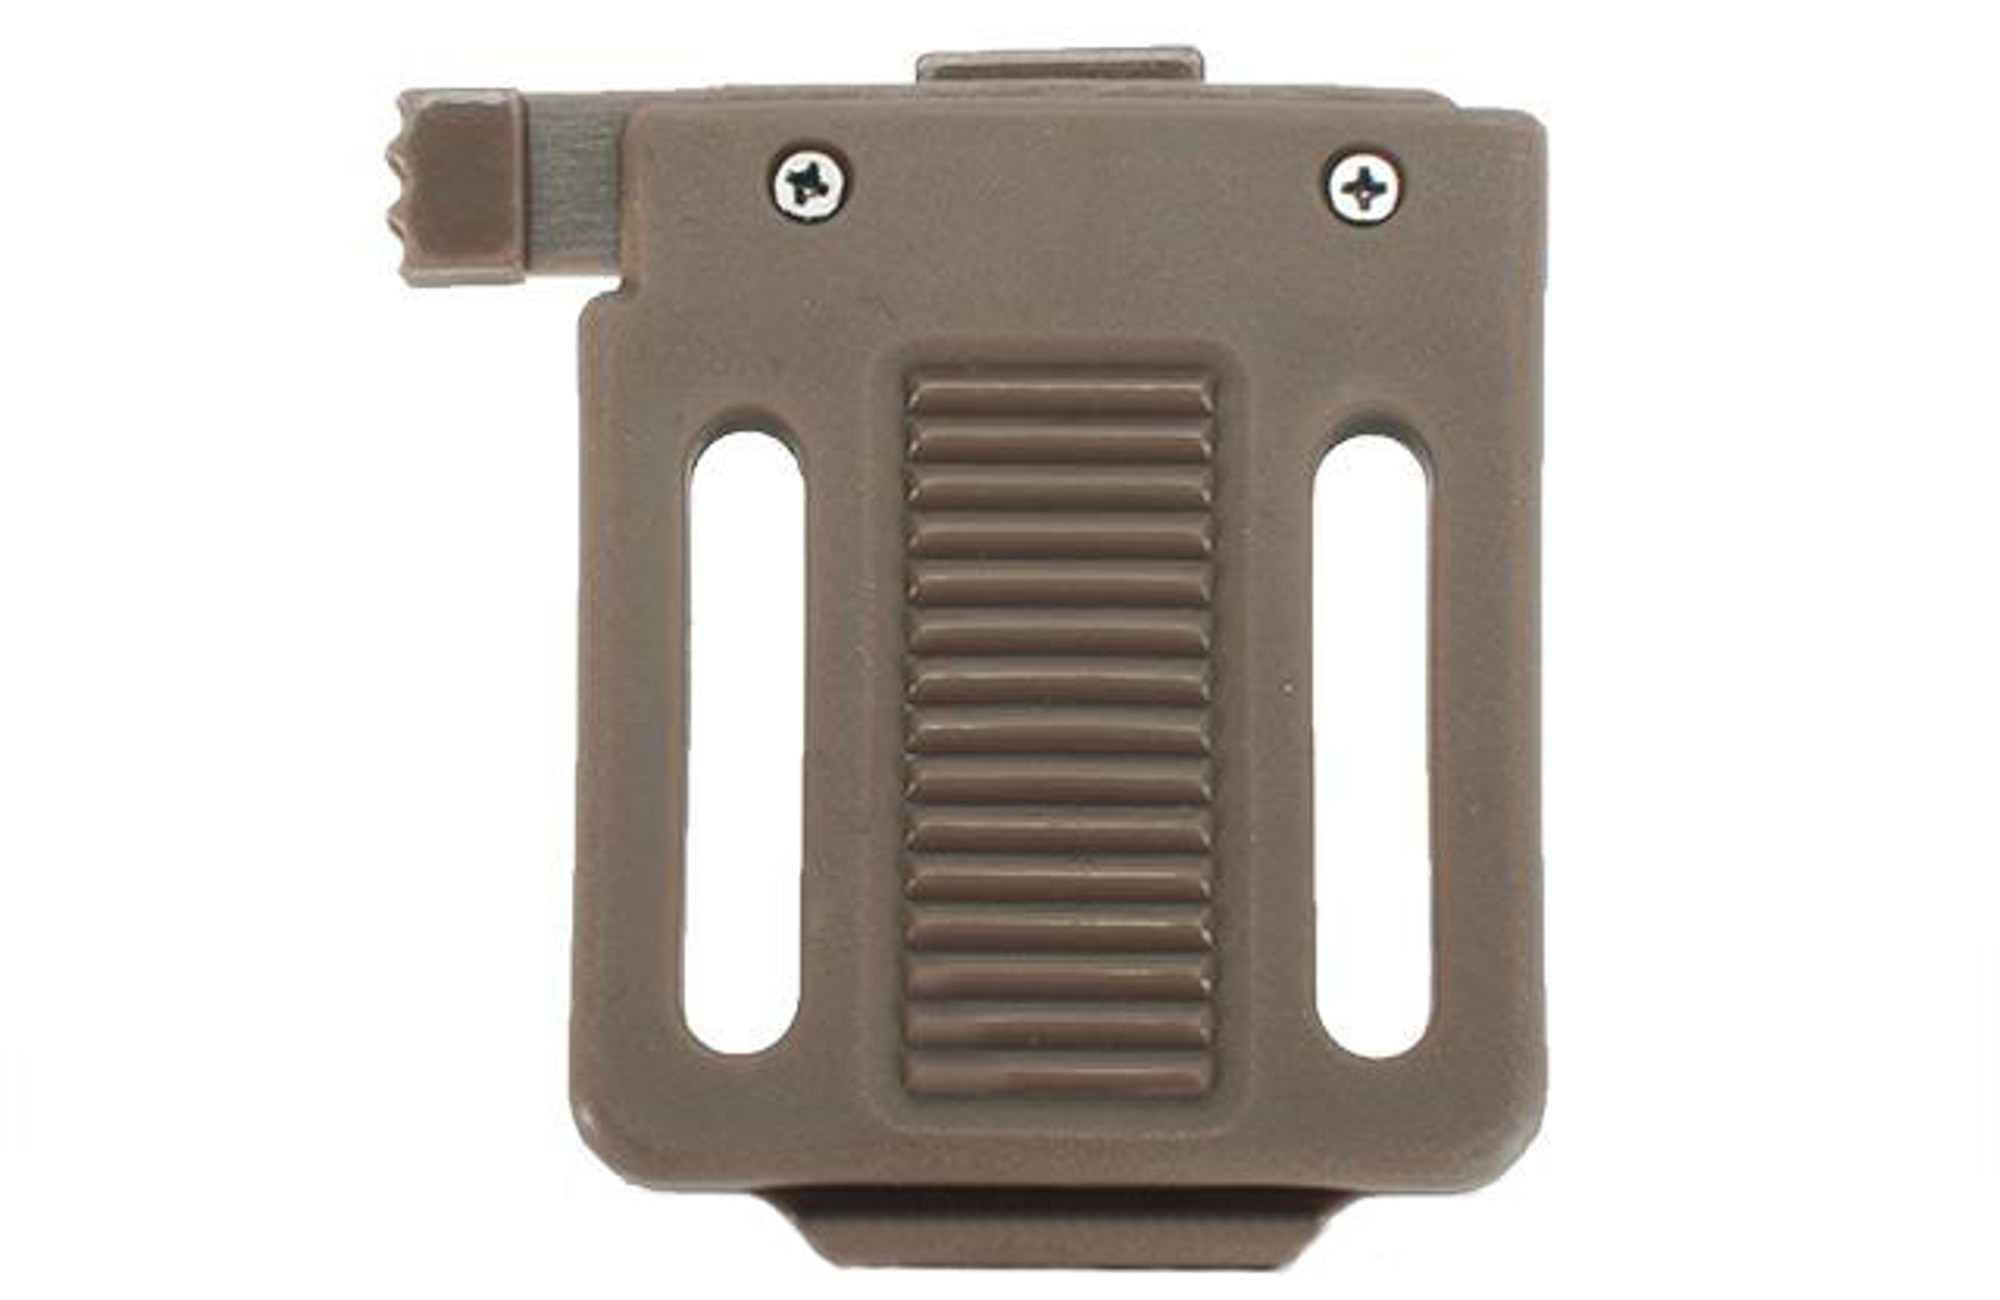 Avengers NVG Type Adapter For Airsoft Bump Helmets - Tan